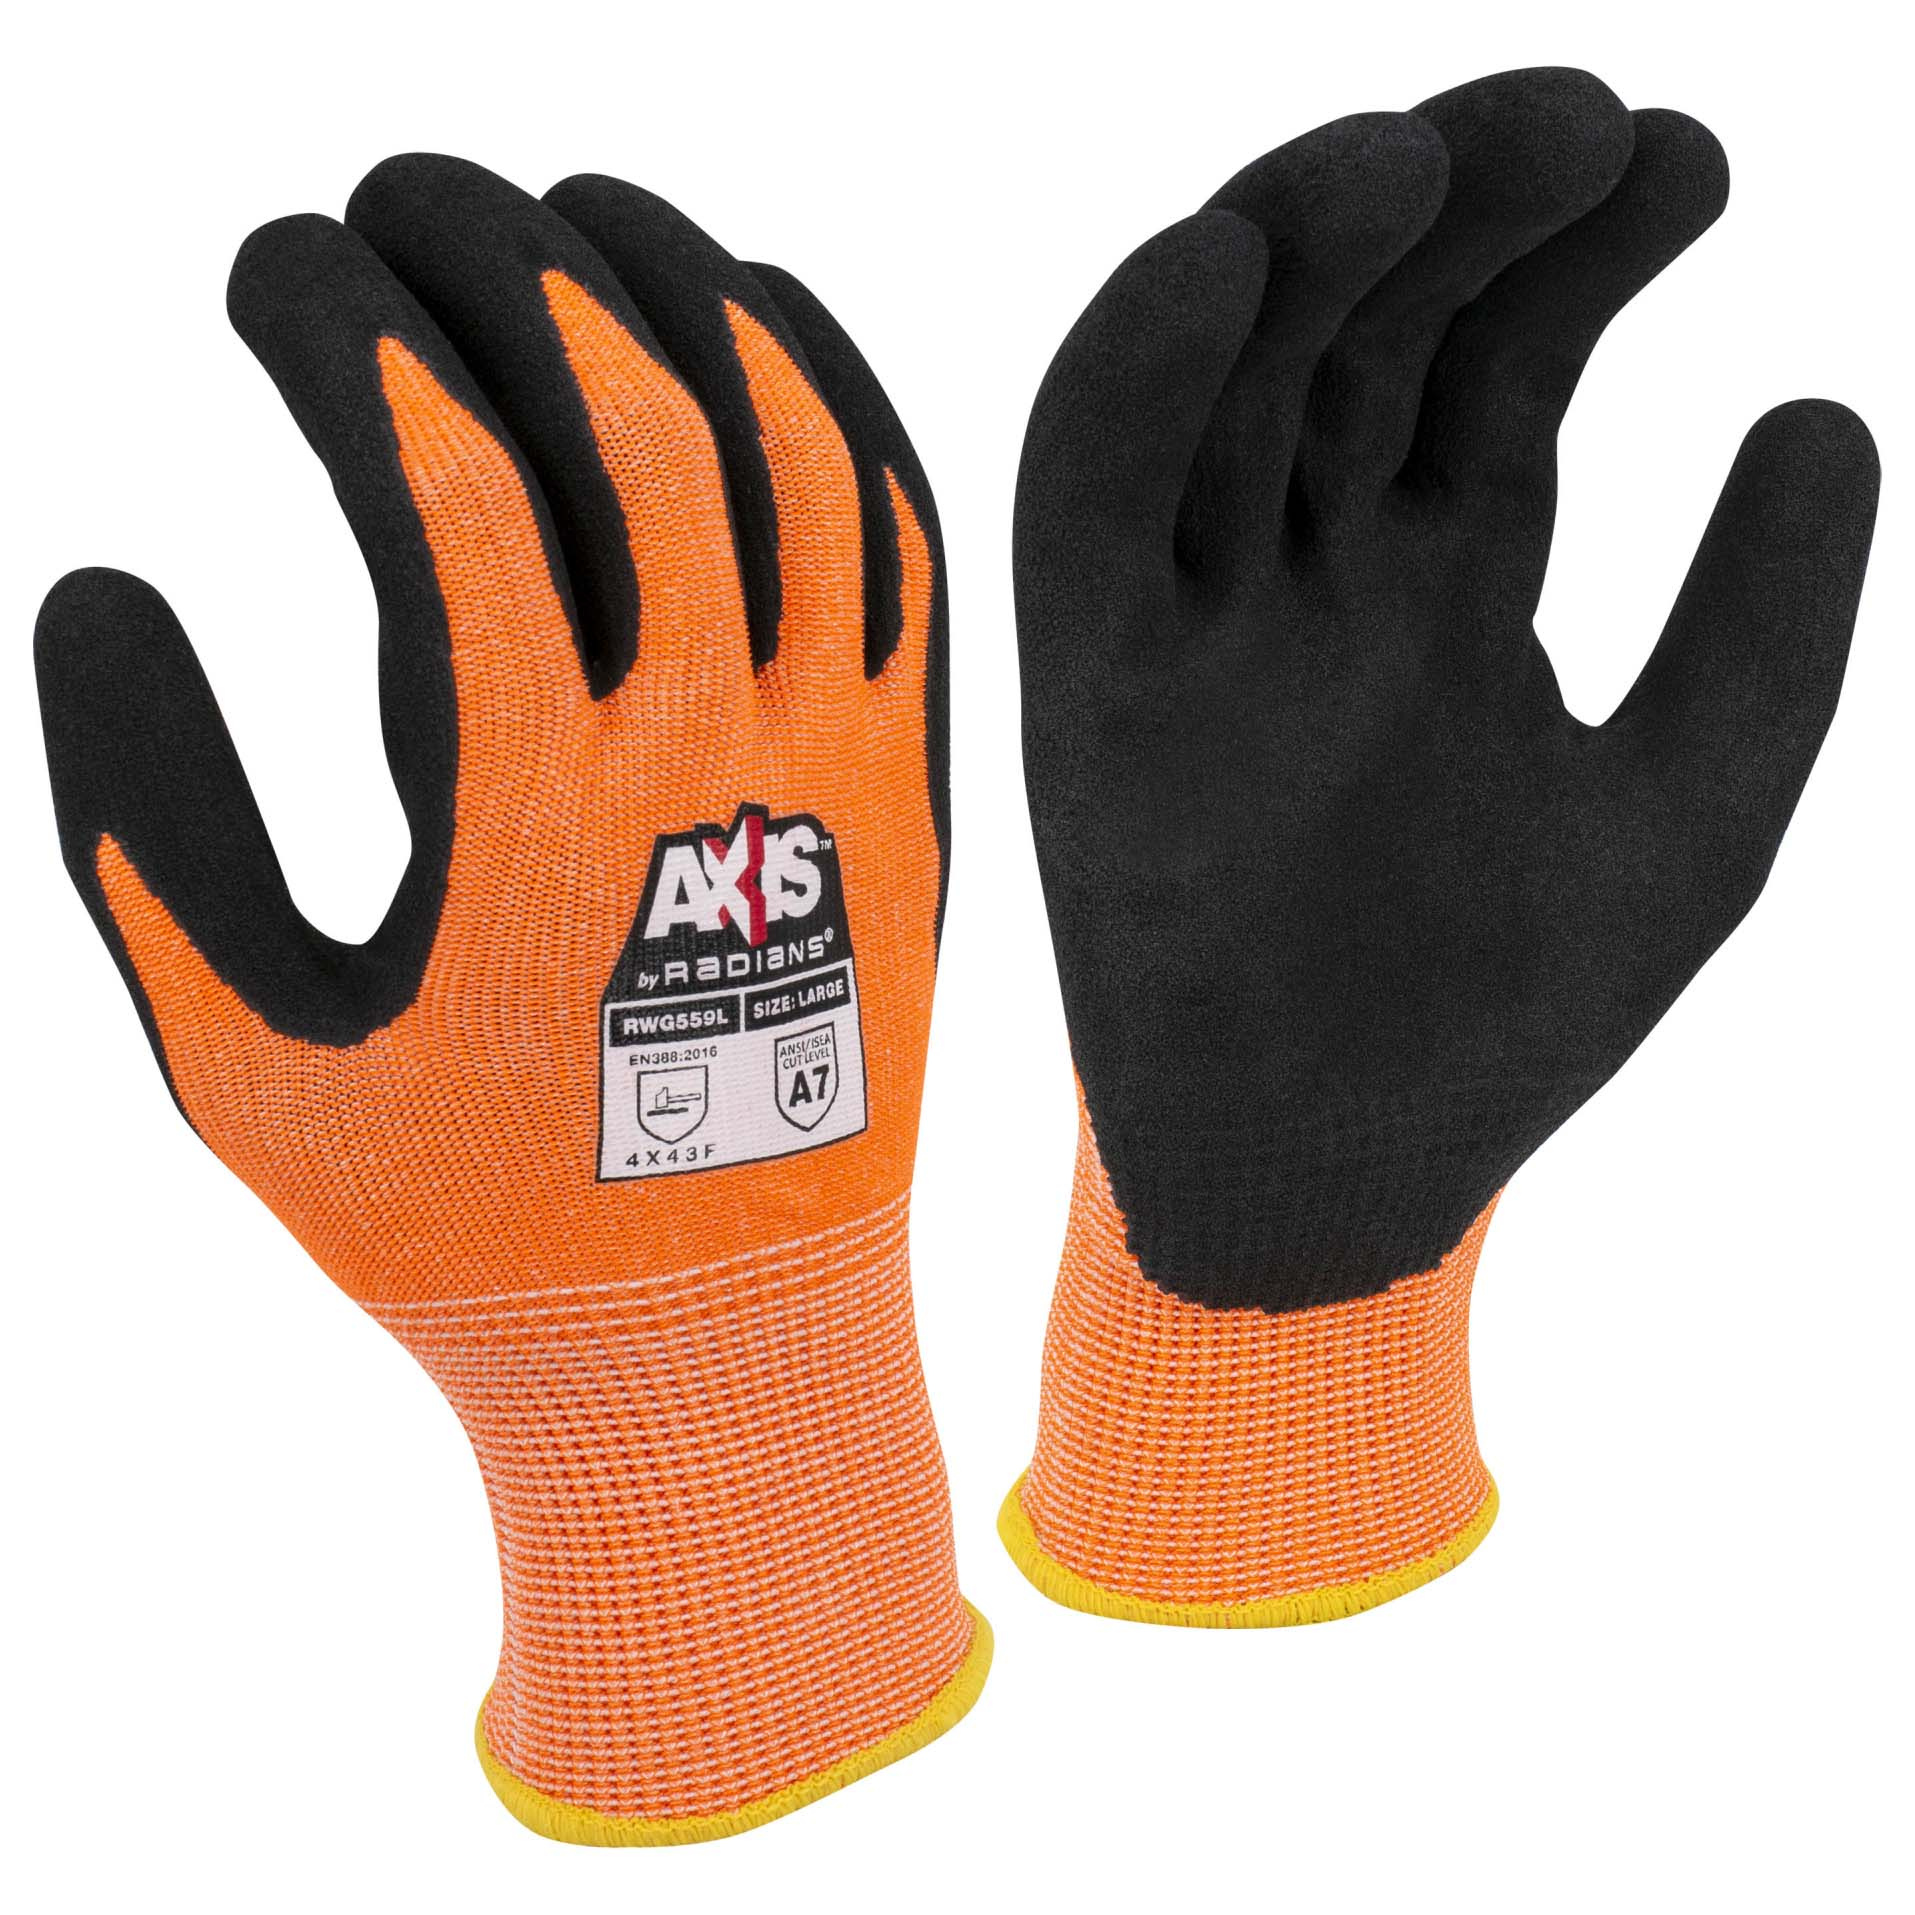 Thin Nitrile Coated Cut Resistant Work Gloves, 14 Length, A3 Cut